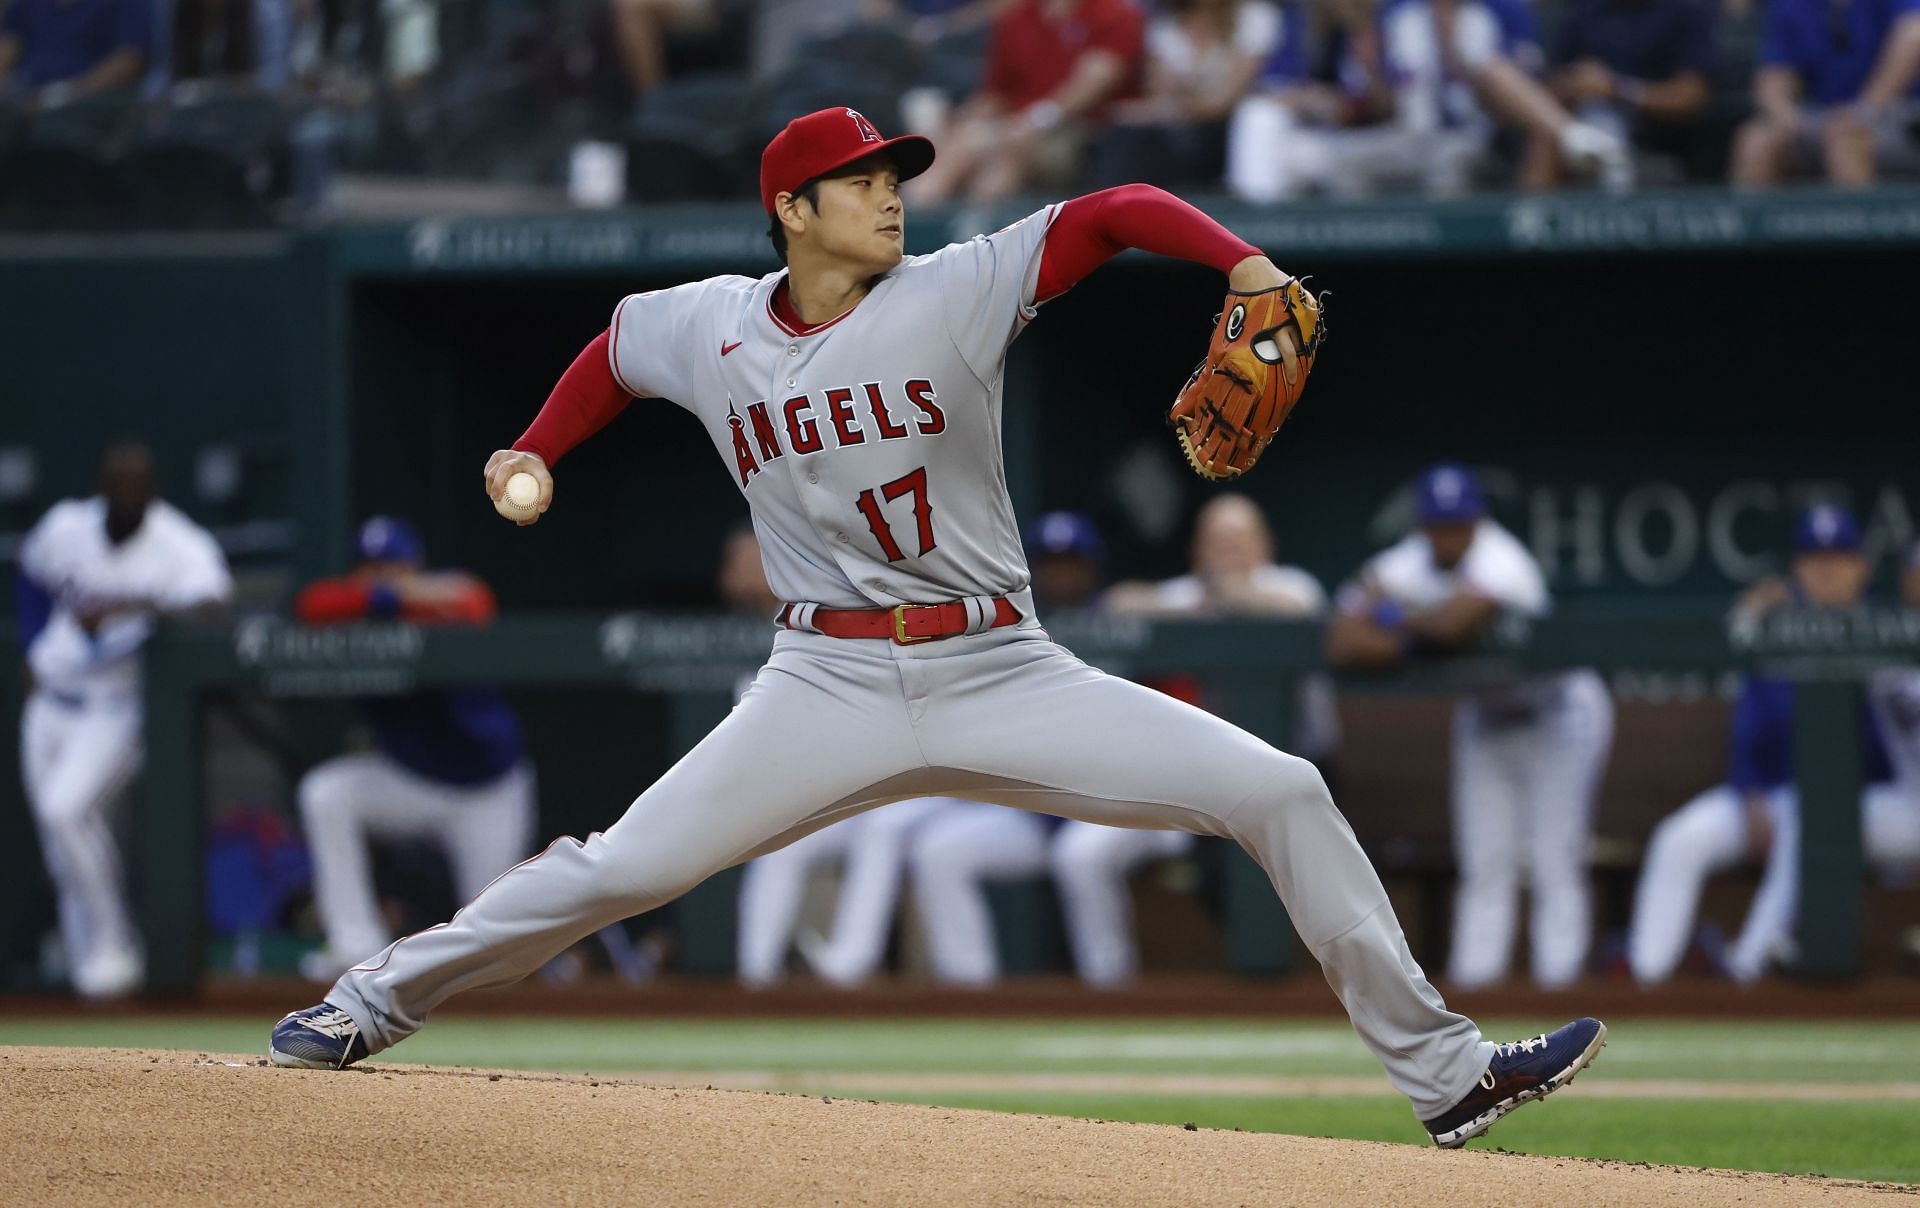 Los Angeles Angels starter Ohtani was in full form on Wednesday night when he struck out 12 Houston Astros at Minute Maid Park in Houston, Texas